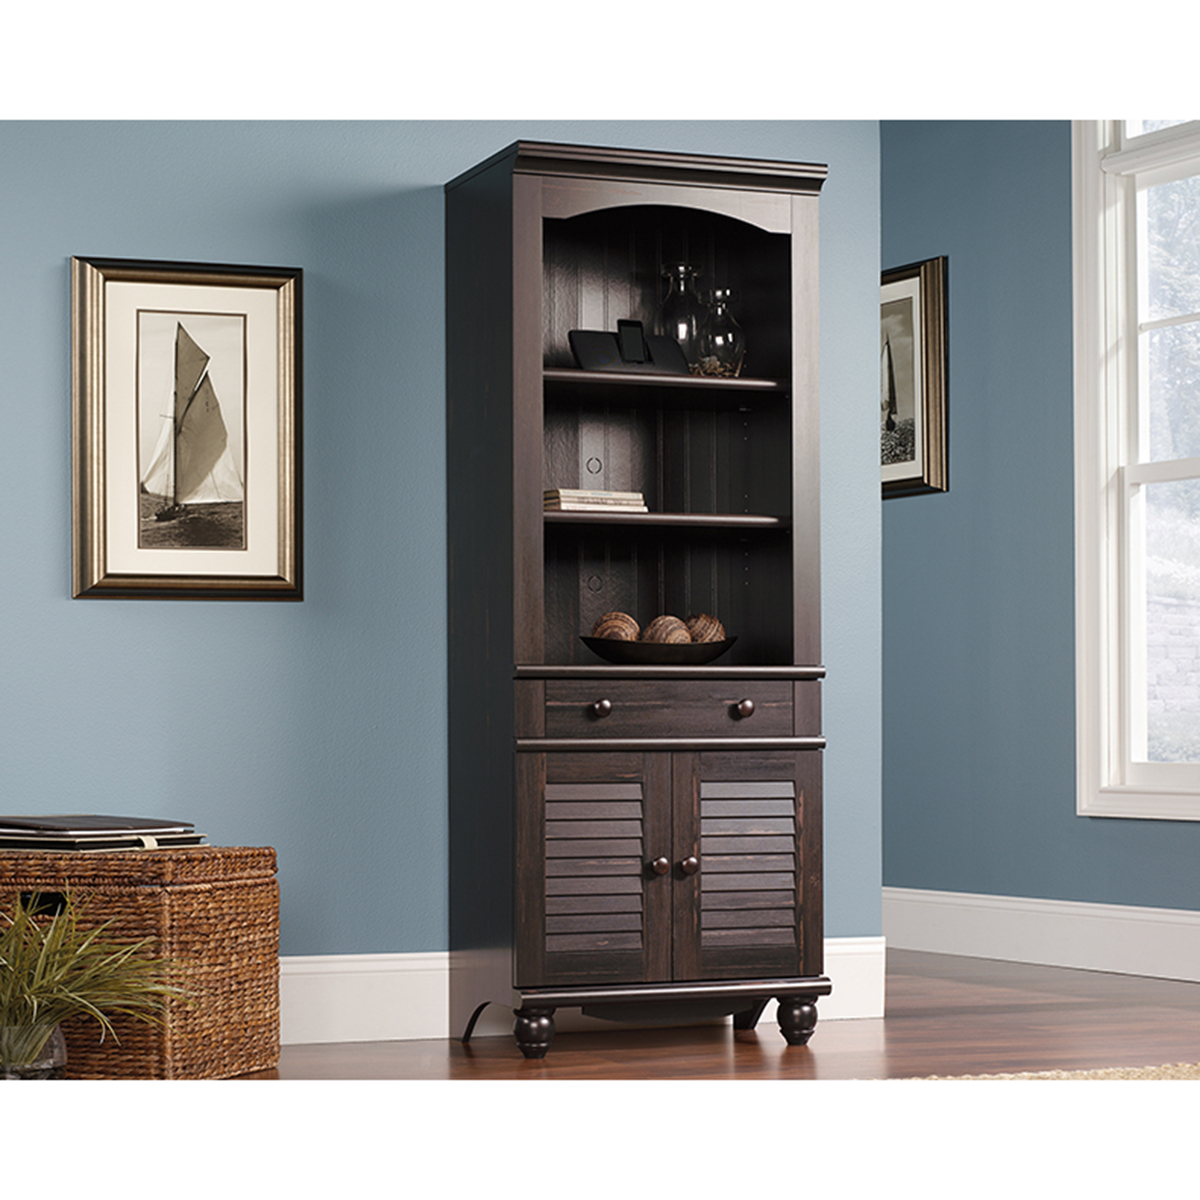 Sauder Harbor View(R) Library With Doors - Antiqued Paint